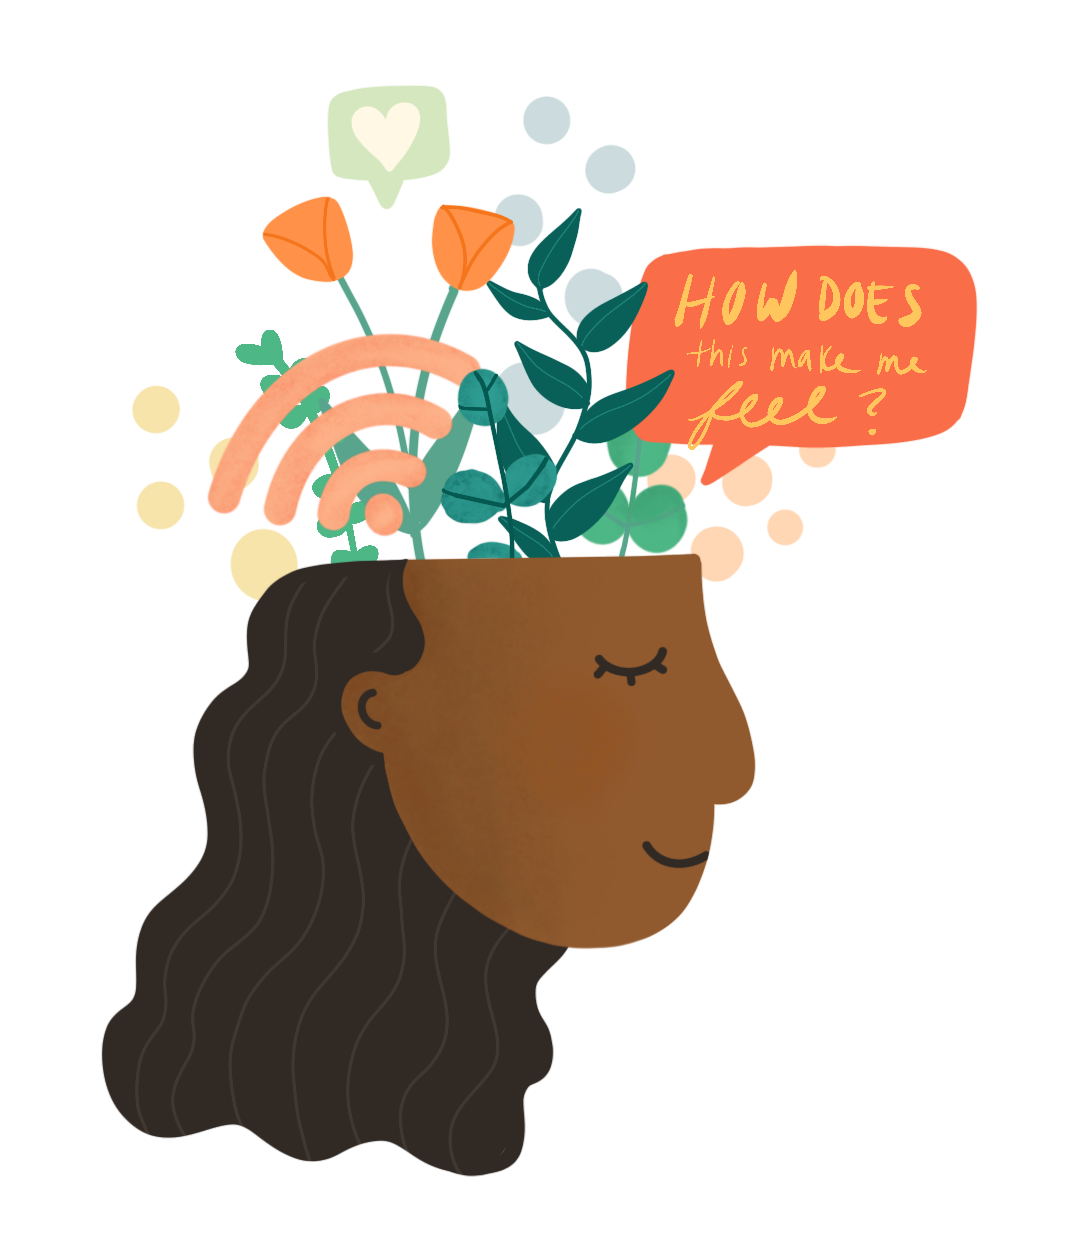 A cartoonish drawing of the side-view of the bottom three-quarters of a woman's head. On the other top quarter above her head are drawings of a wifi signal symbol, flowers and plants, and circles, as well as a red thought bubble that has the words "How does this make me feel?" in it.